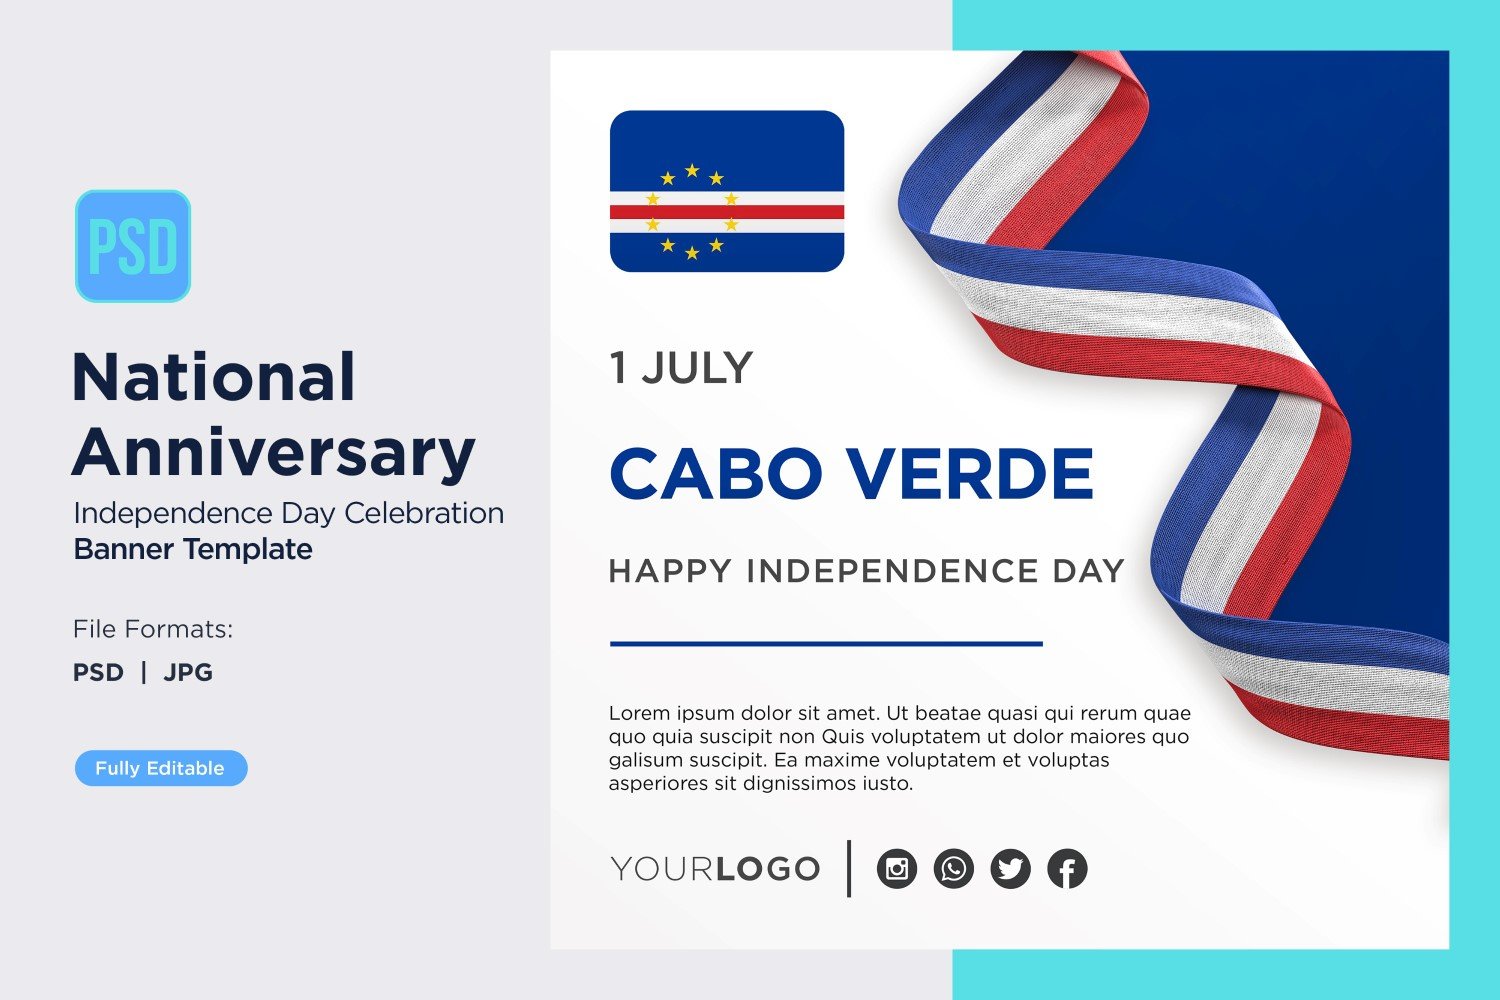 Template #402795 Day Celebration Webdesign Template - Logo template Preview